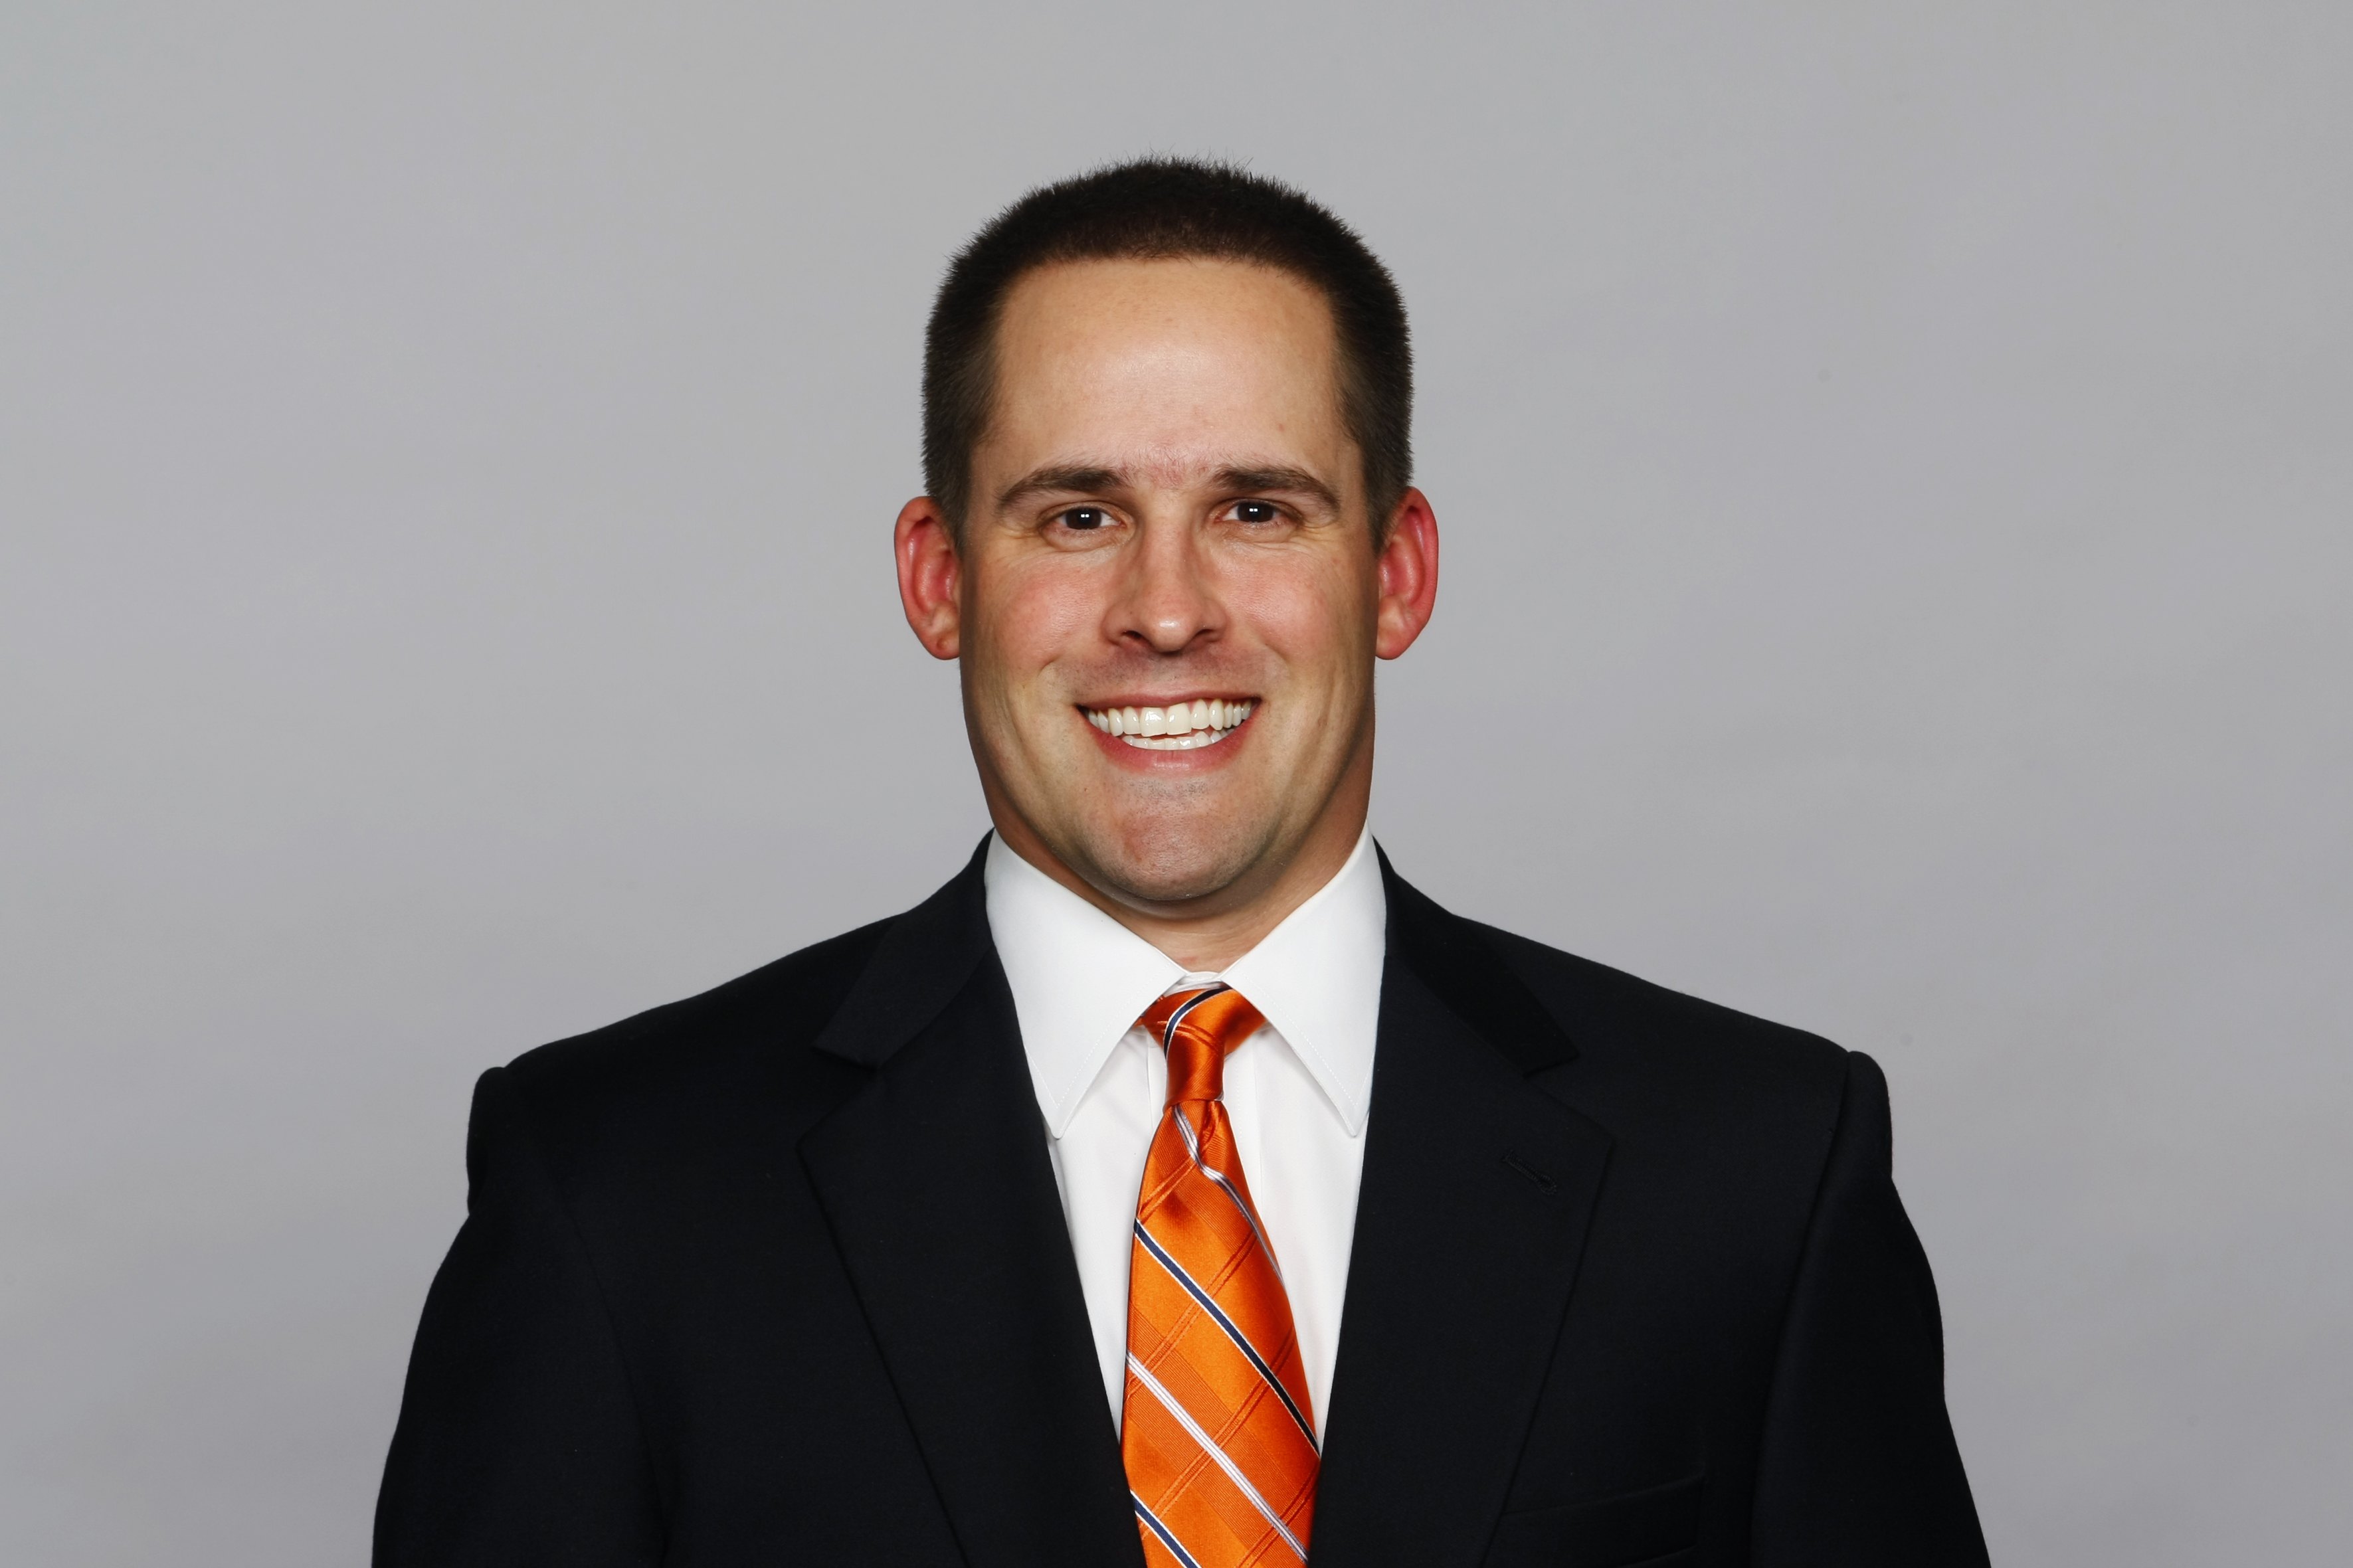 McDaniels is hired by the Denver Broncos to turn the 8-8 team around.